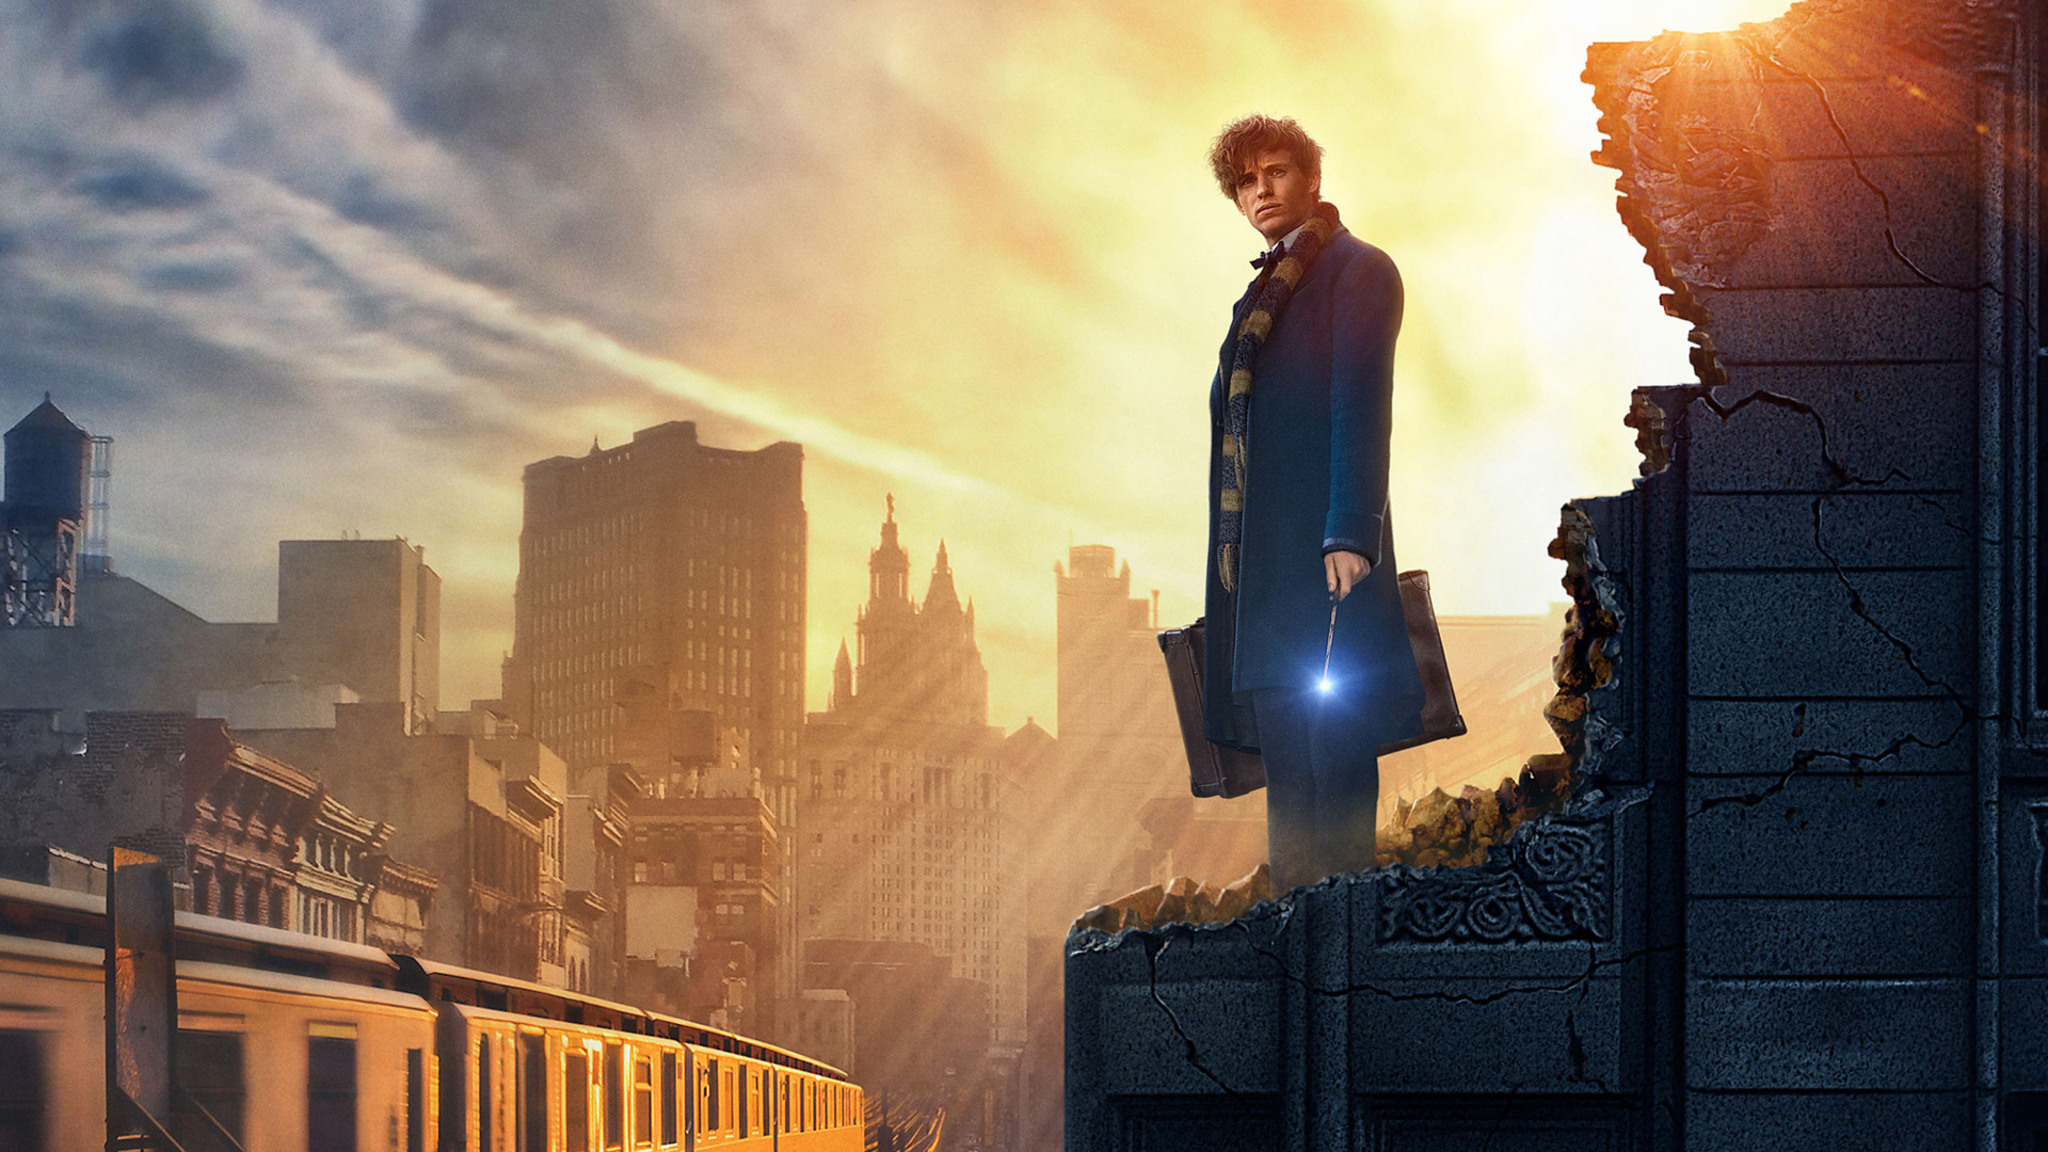 Fantastic Beasts And Where To Find Them Film Full HD Online 2016